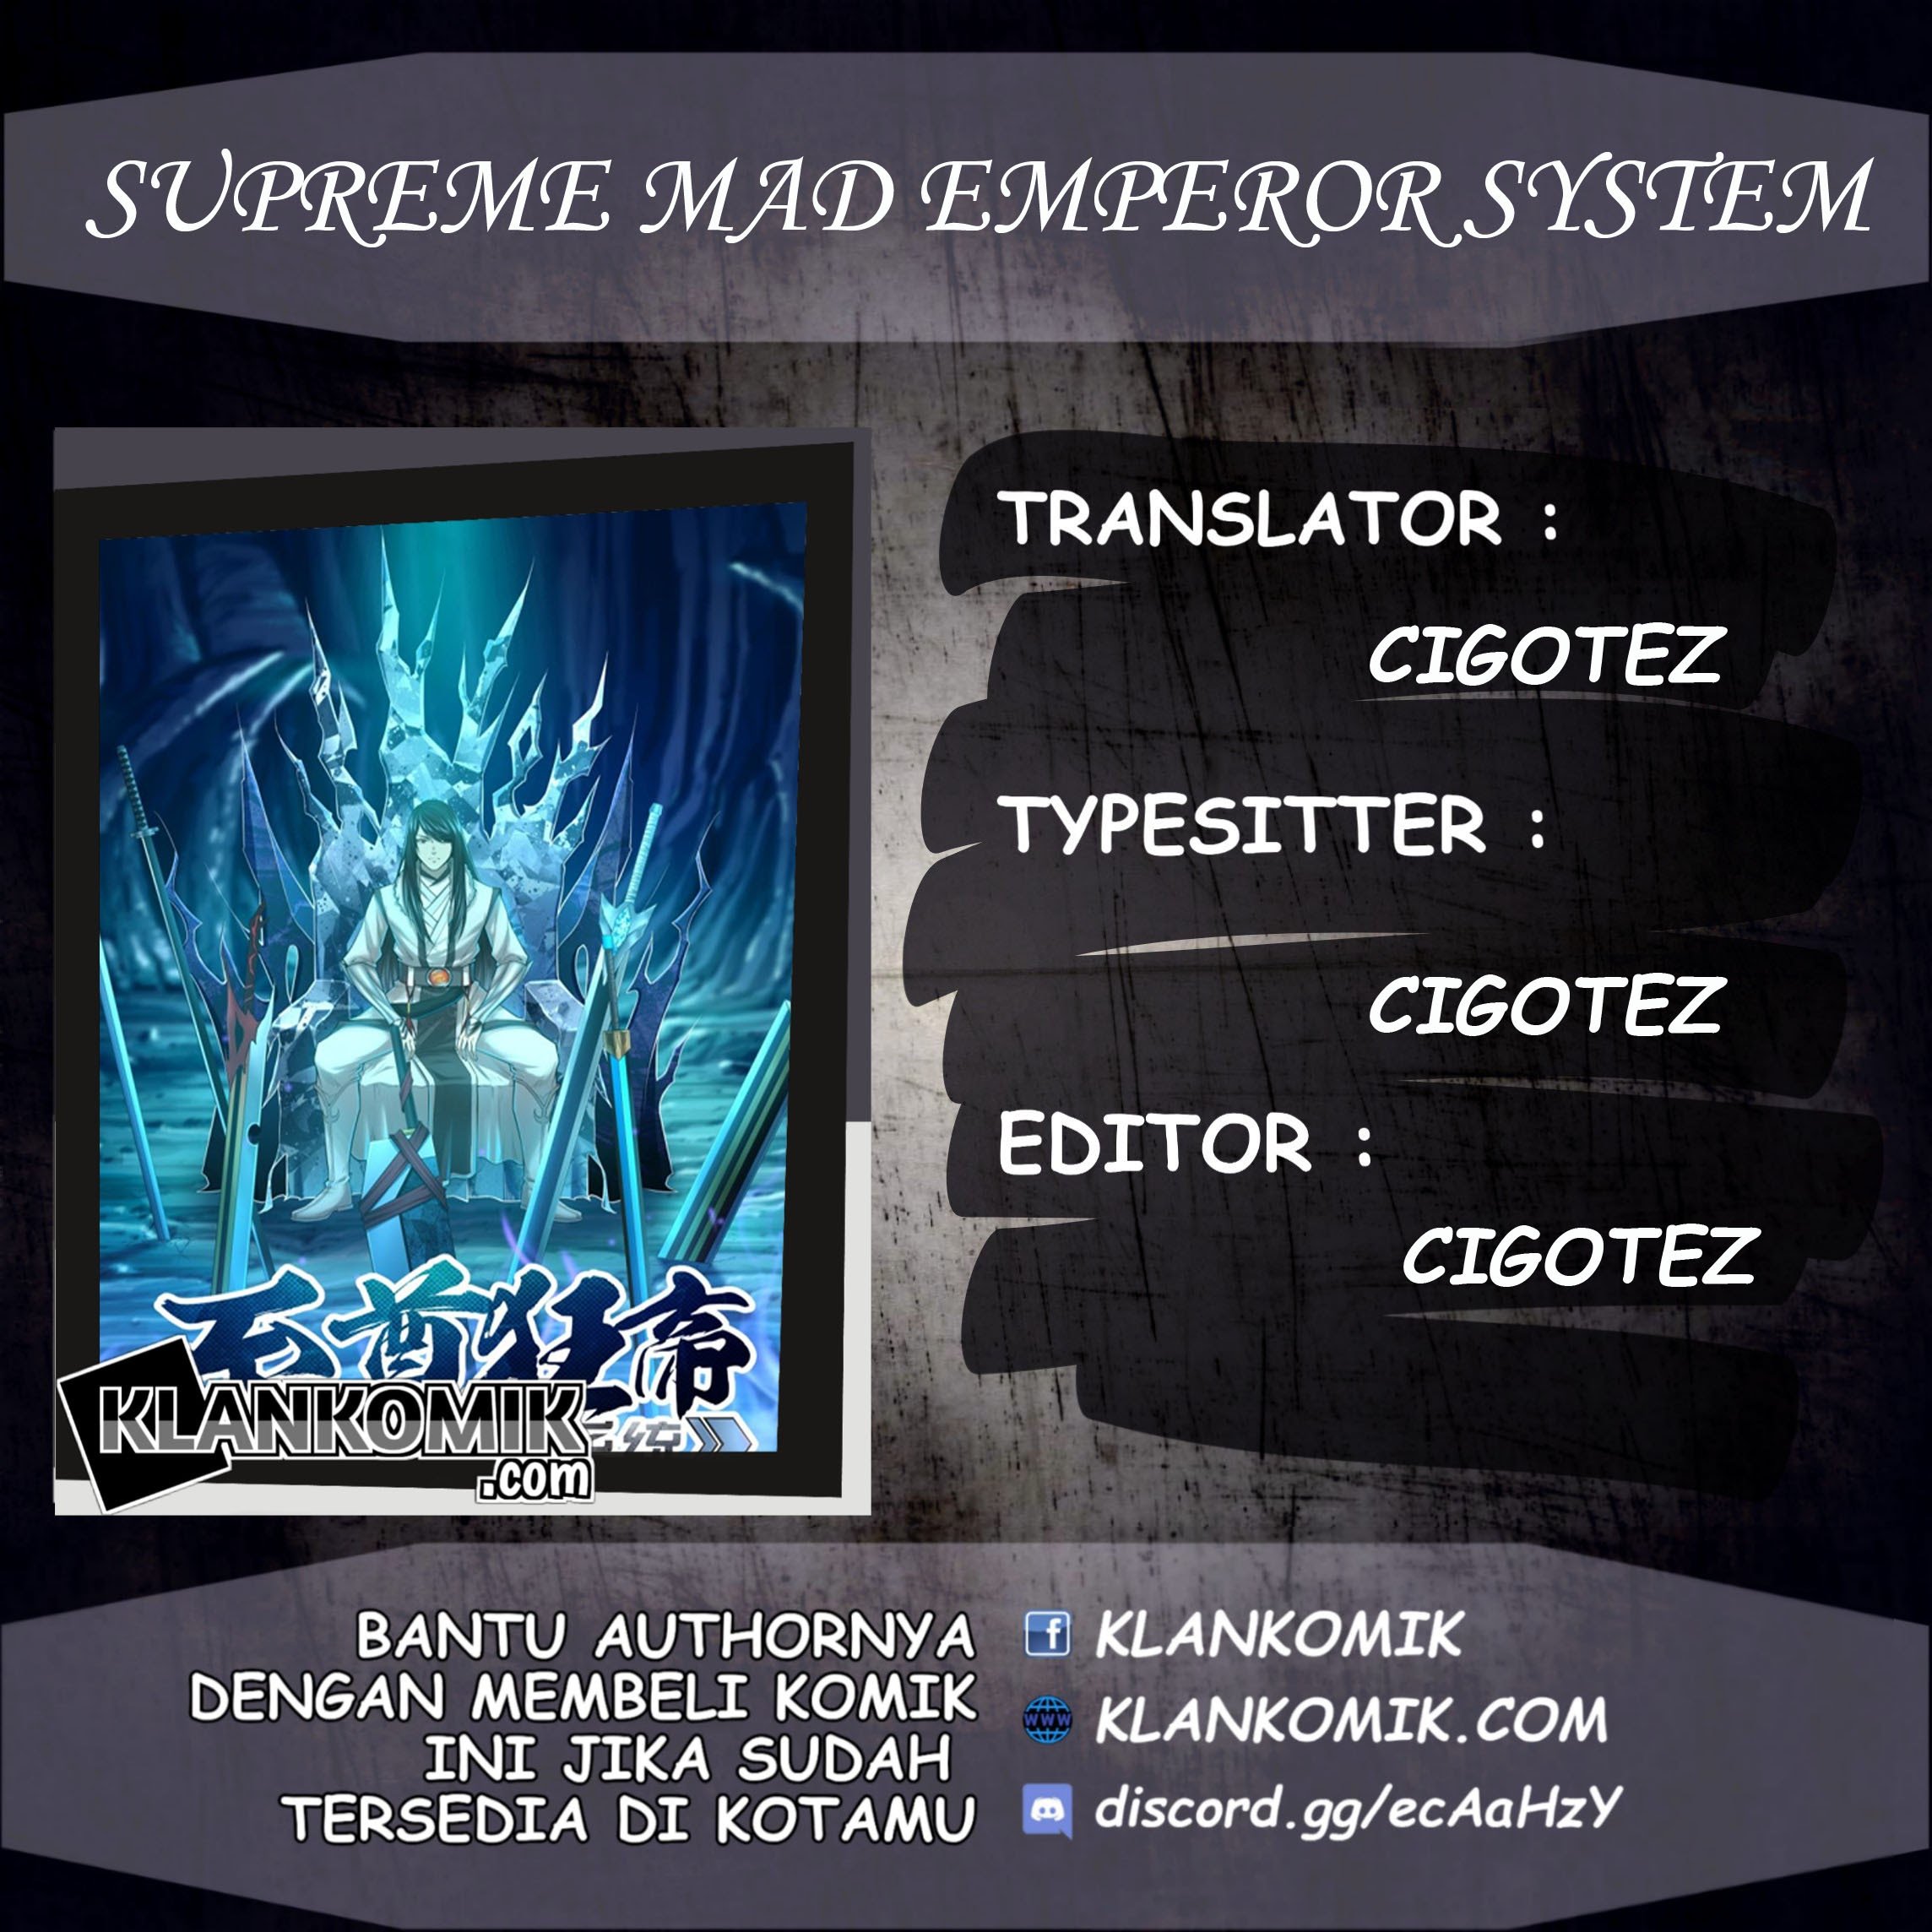 Extreme Mad Emperor System (Supreme Mad Emperor System) Chapter 20